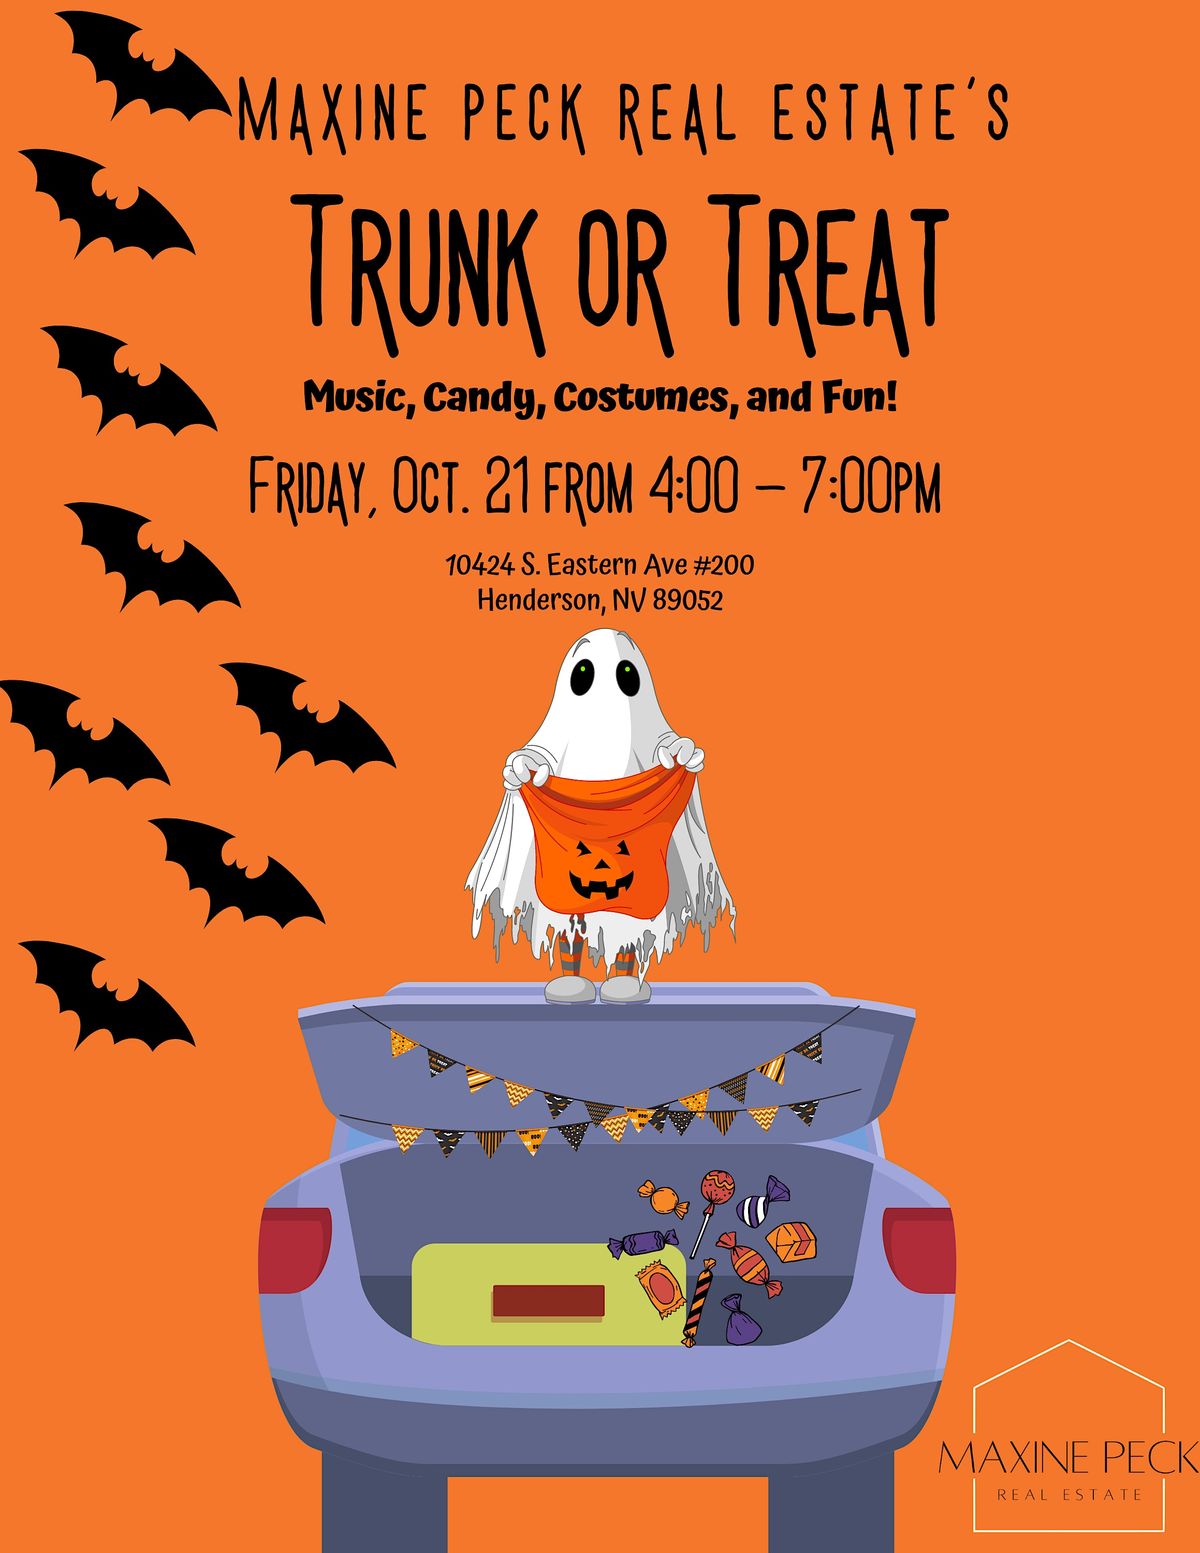 Trunk or Treat 2022, Maxine Peck Real Estate, Henderson, 21 October 2022